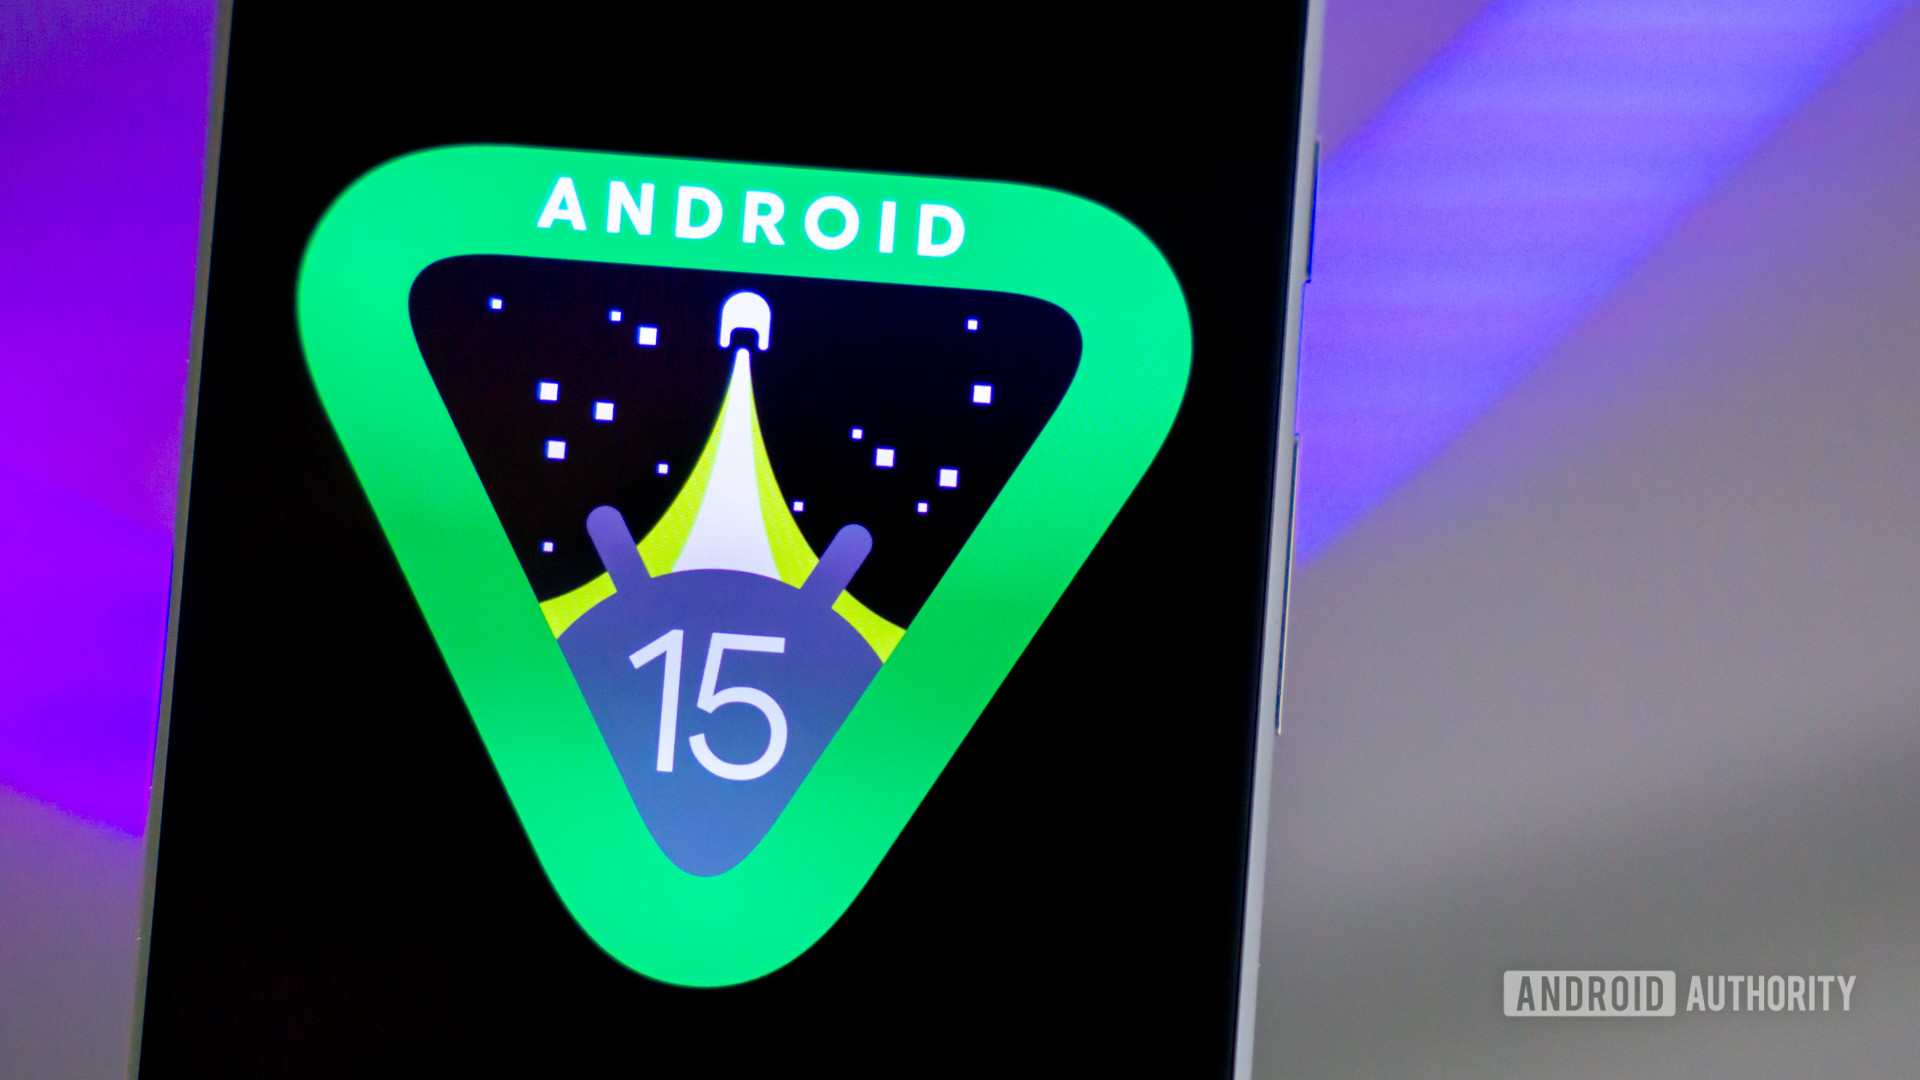 Android 15 logo on smartphone with light strip in background stock photo (12)